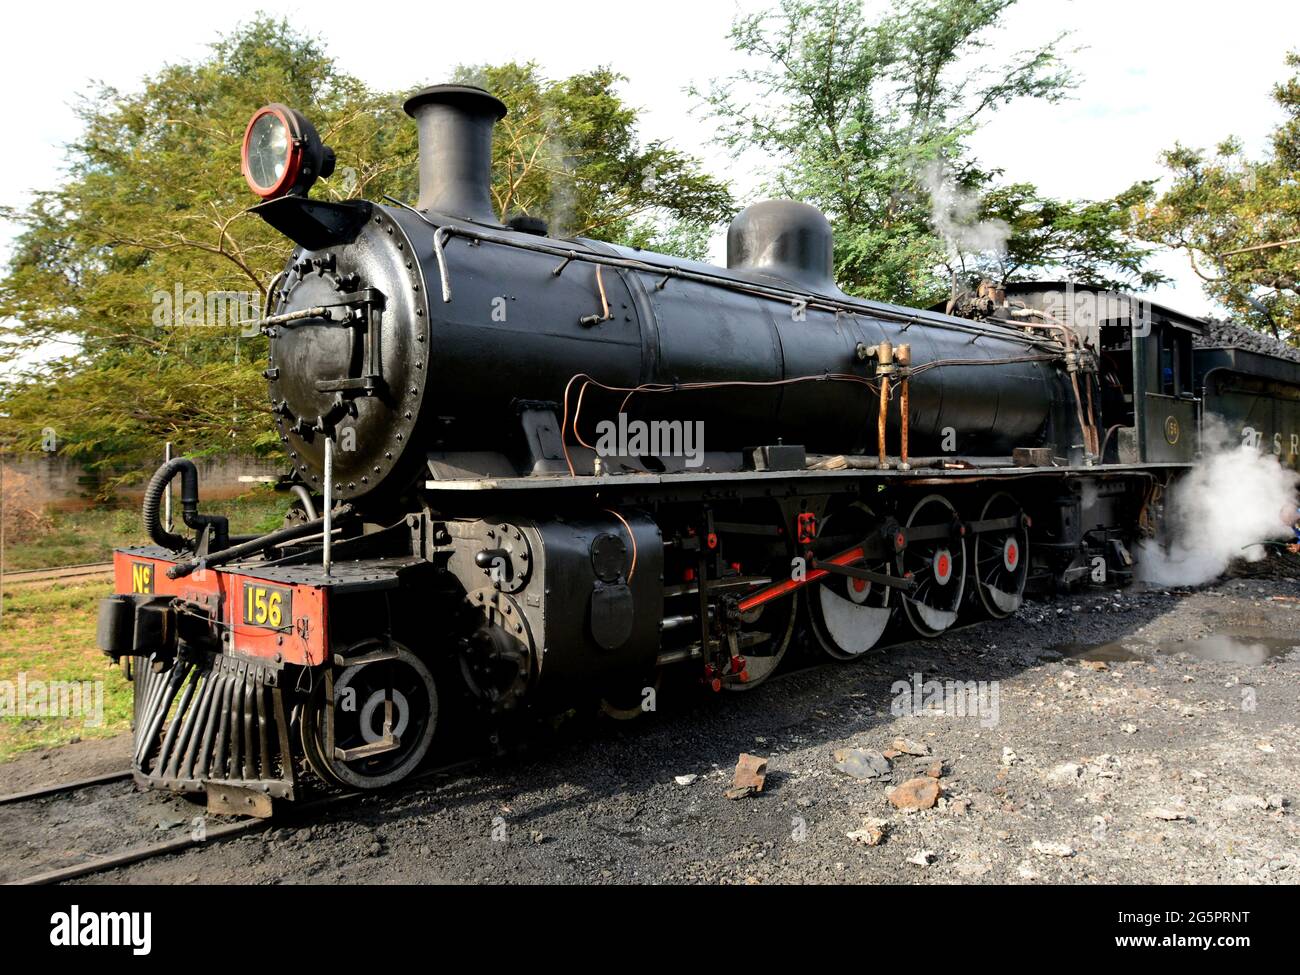 ZAMBIA. LIVINGSTONE. THE STEAM MACHINE OF THE ROYAL LIVINGSTONE EXPRESS, TRAIN FROM 1935, WHICH GOES TO THE ZIMBABWEAN BORDER TO SEE THE VICTORIA FALL Stock Photo